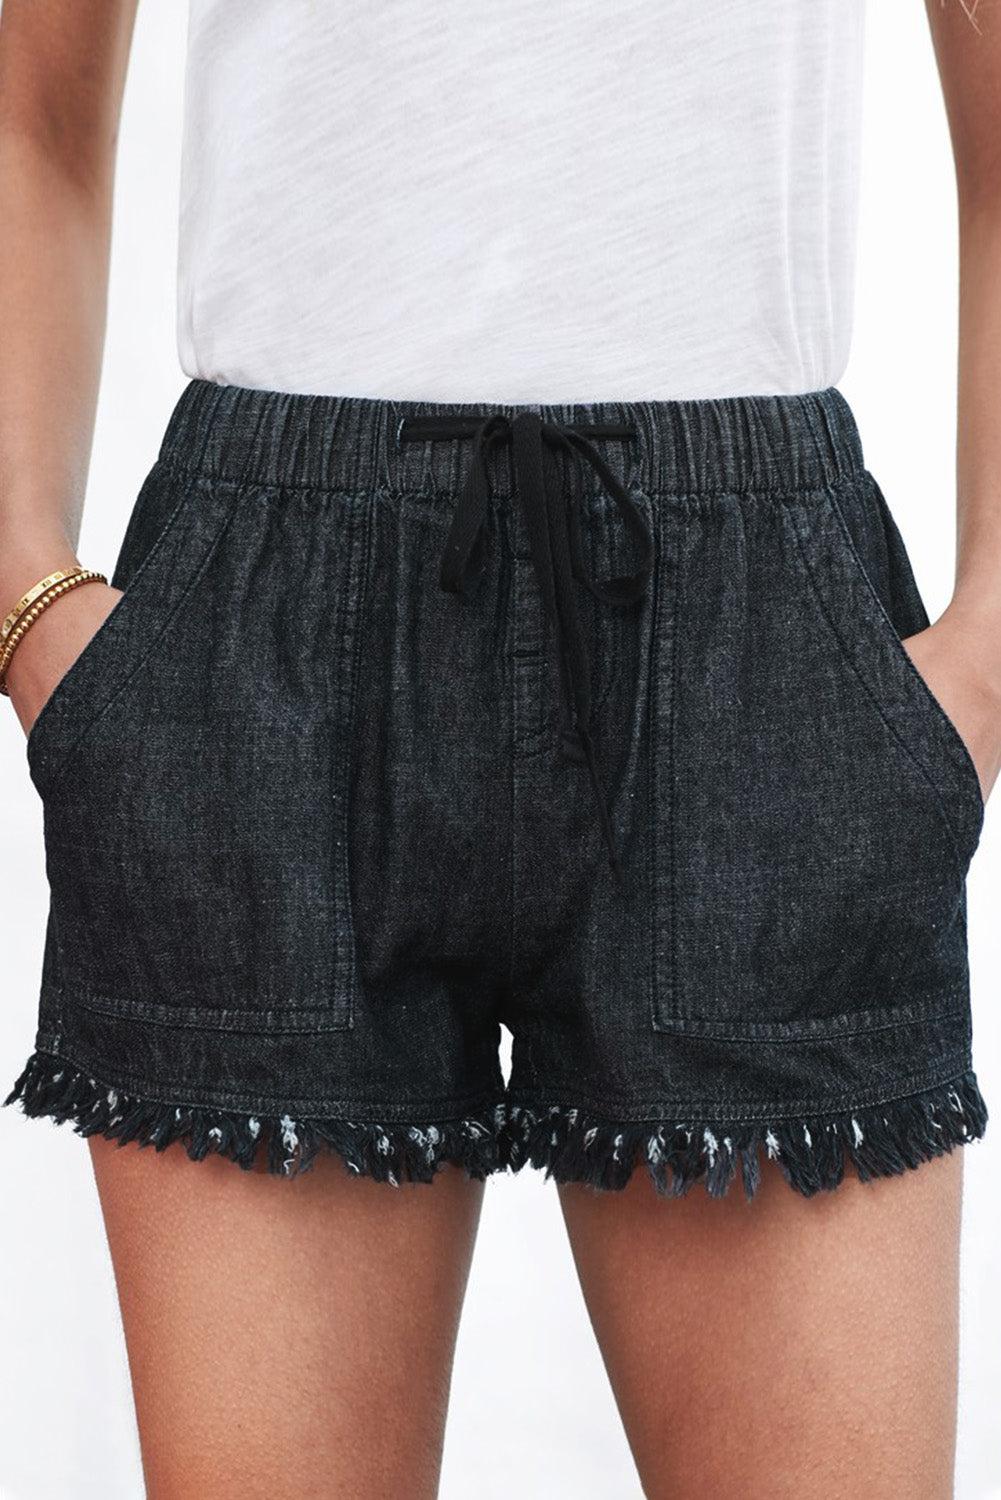 Stay casual and stylish with our timeless denim shorts, a wardrobe essential for warm days.